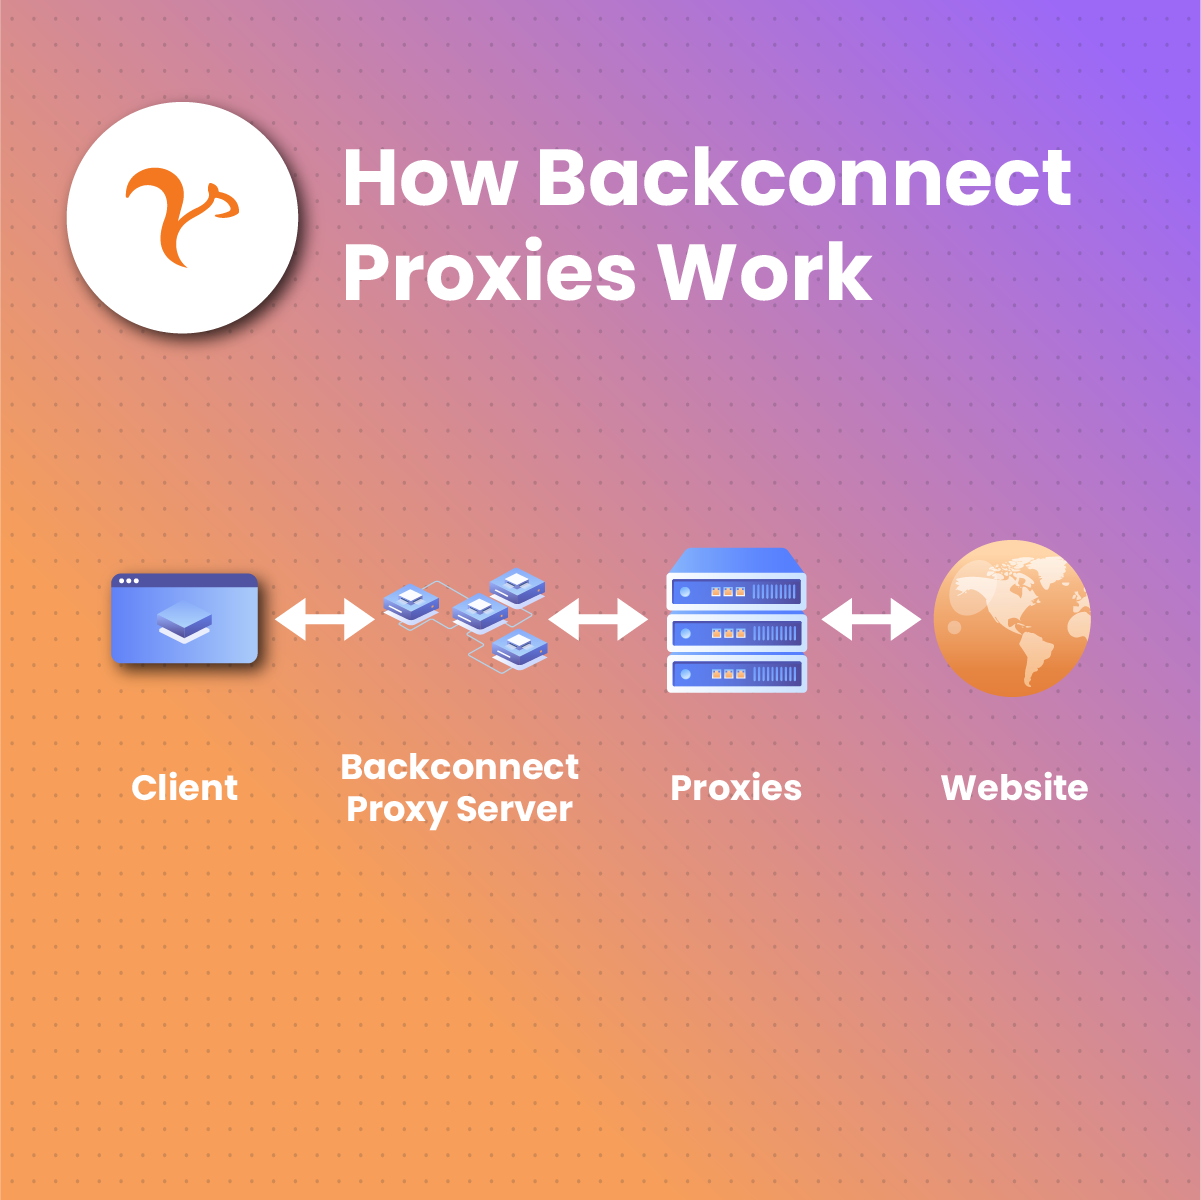 How Backconnect proxies work